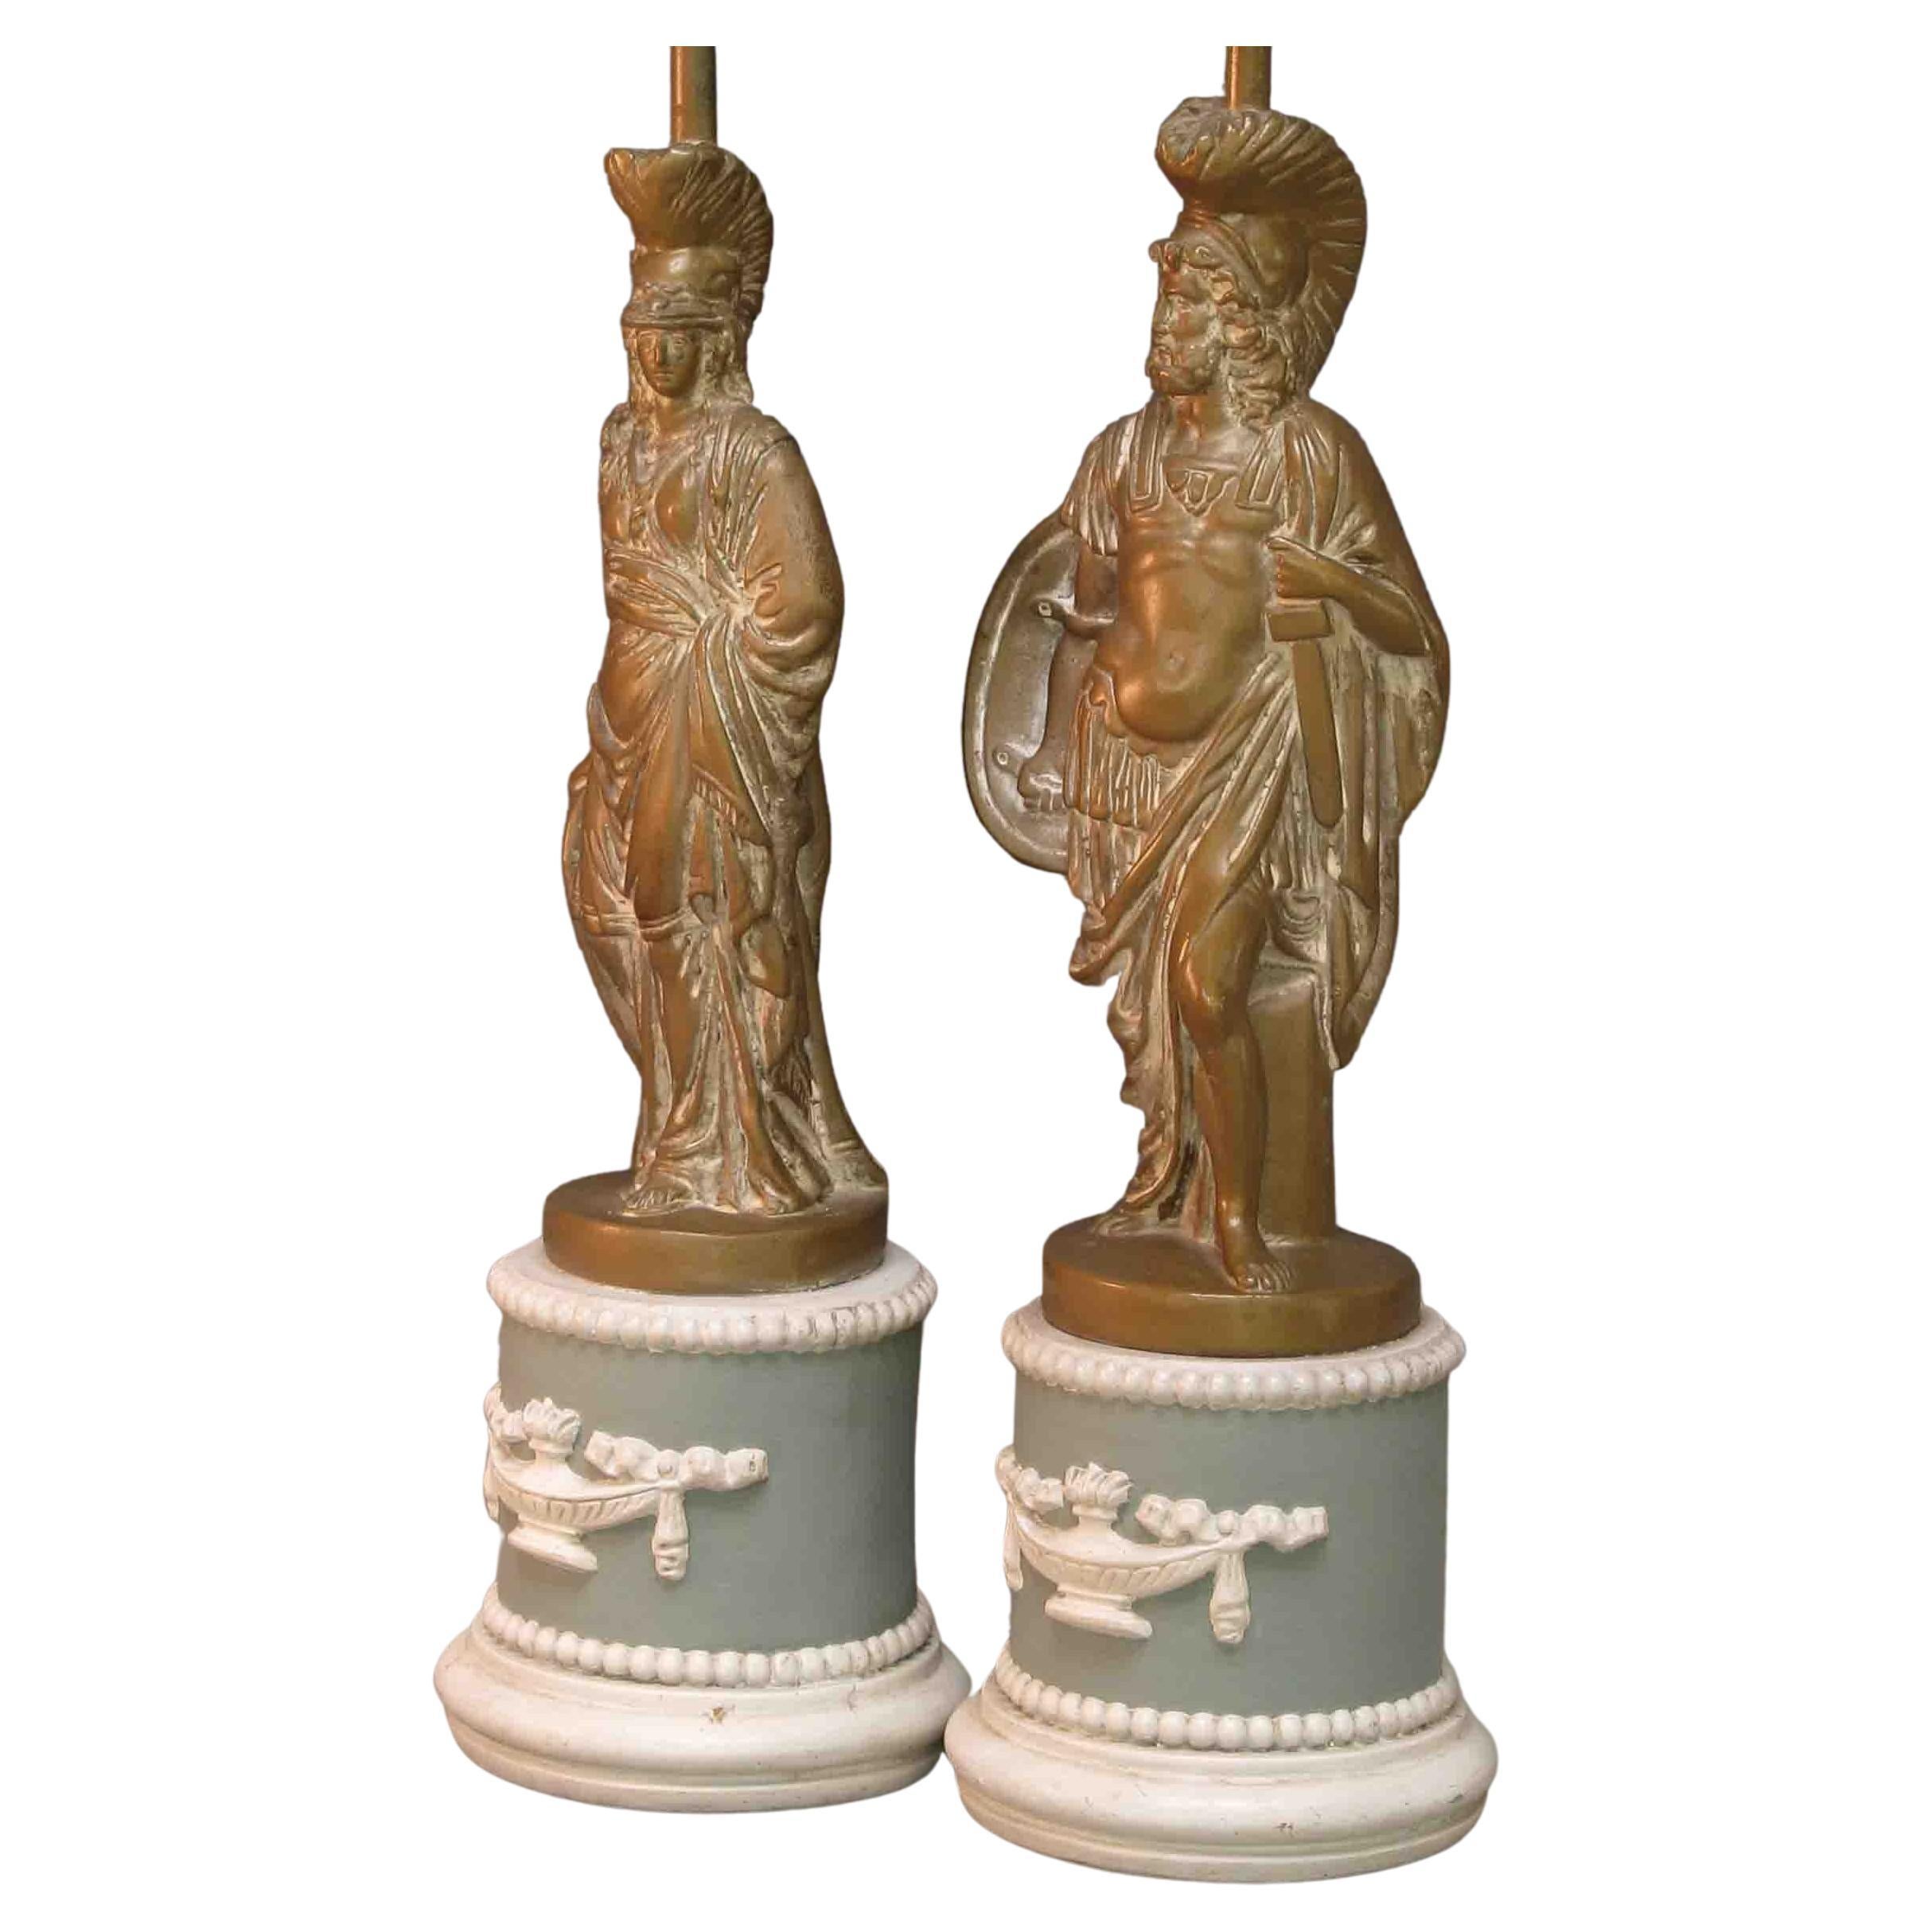 Pair of Patinated Plaster Neoclassical Figural Table Lamps by Sculptureline N.Y.